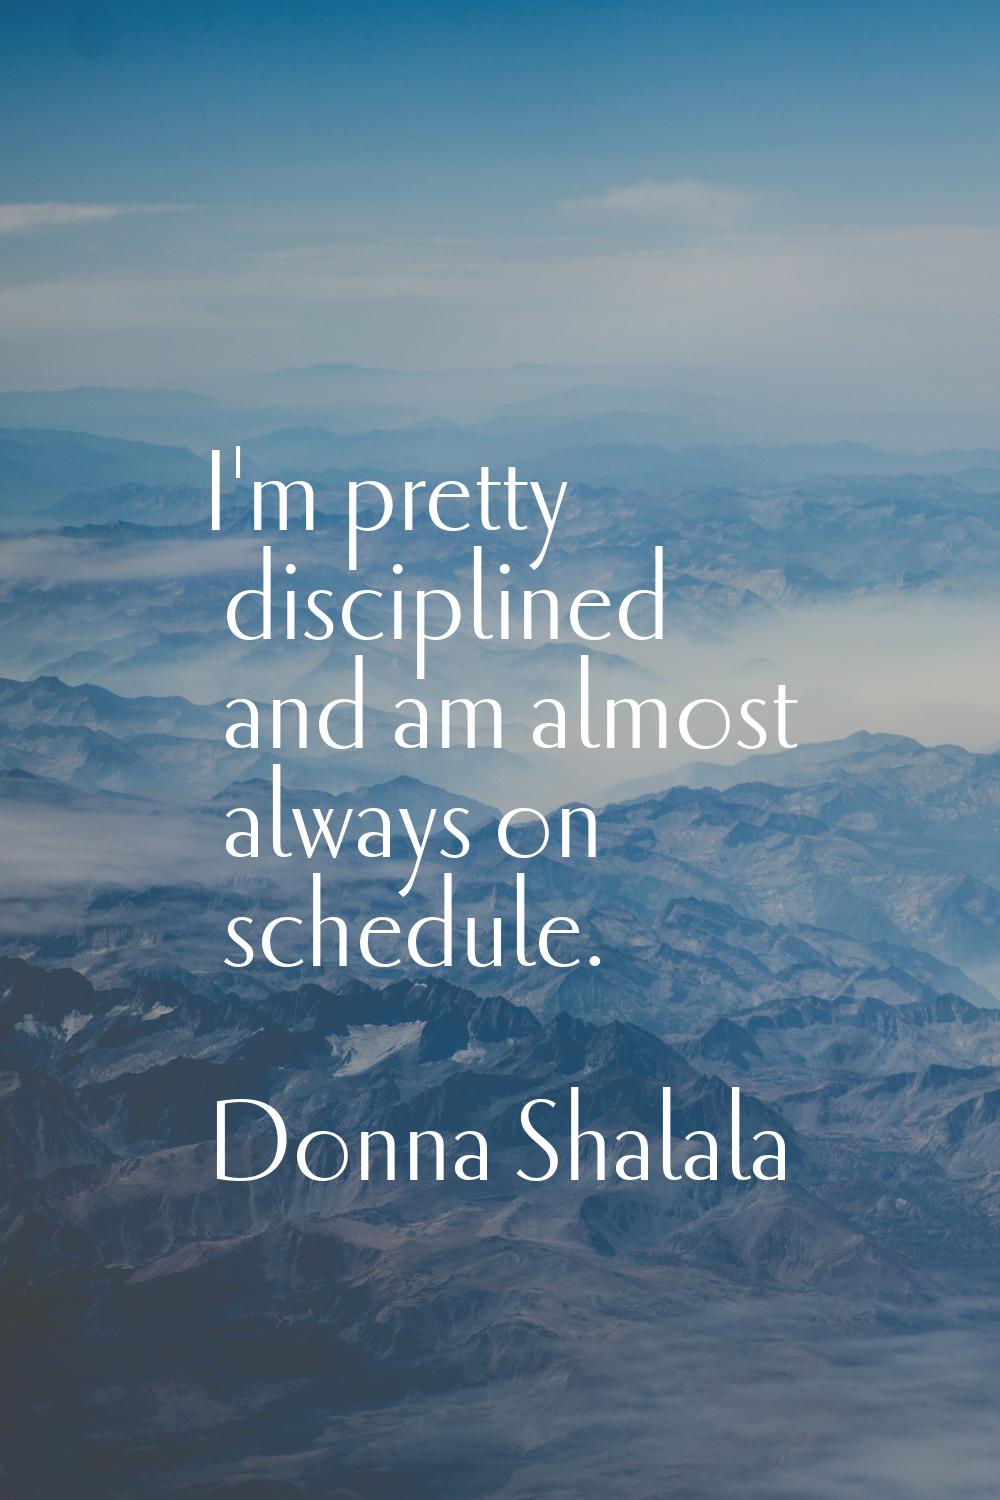 I'm pretty disciplined and am almost always on schedule.